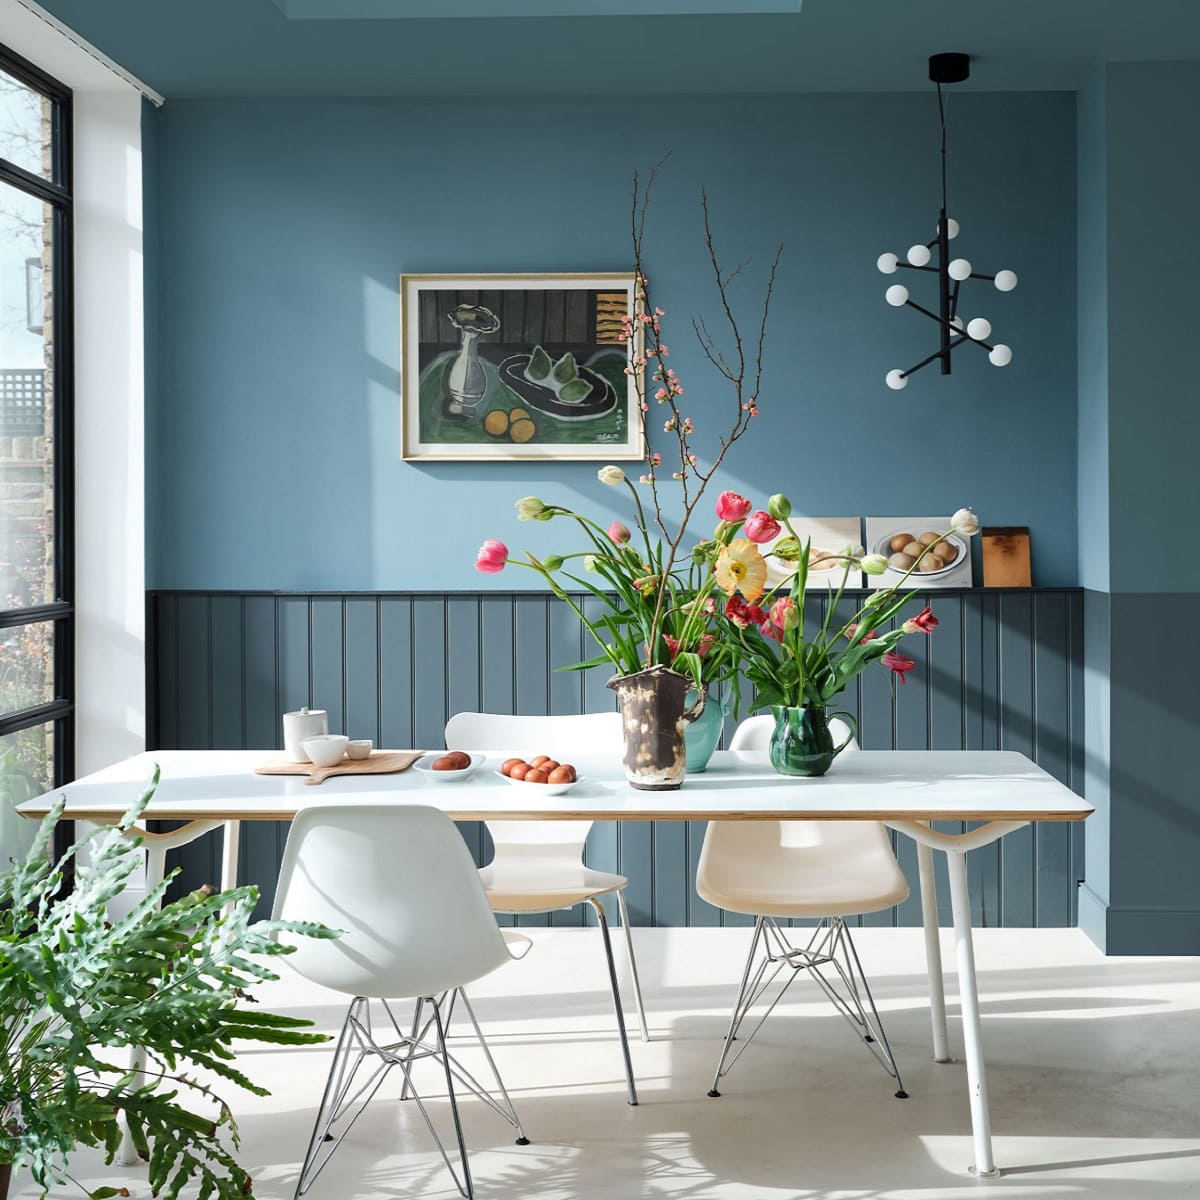 5 Paint Colors Going Out Of Style In 2023: What To Use Instead